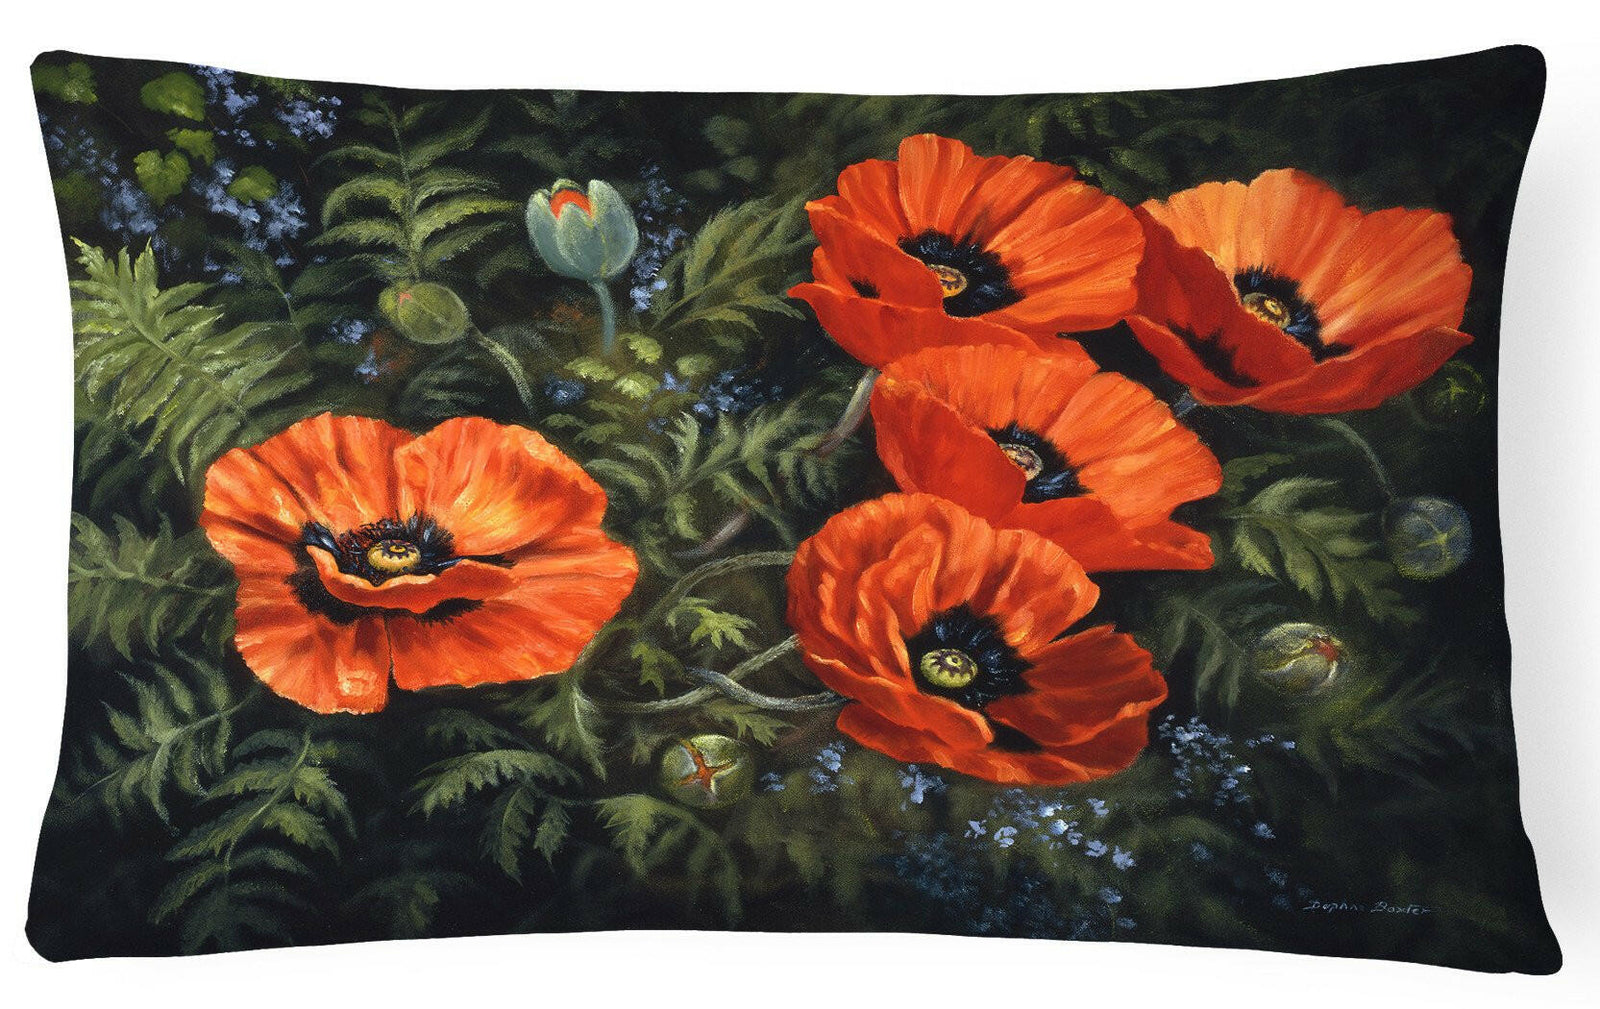 Poppies by Daphne Baxter Fabric Decorative Pillow BDBA0007PW1216 by Caroline's Treasures